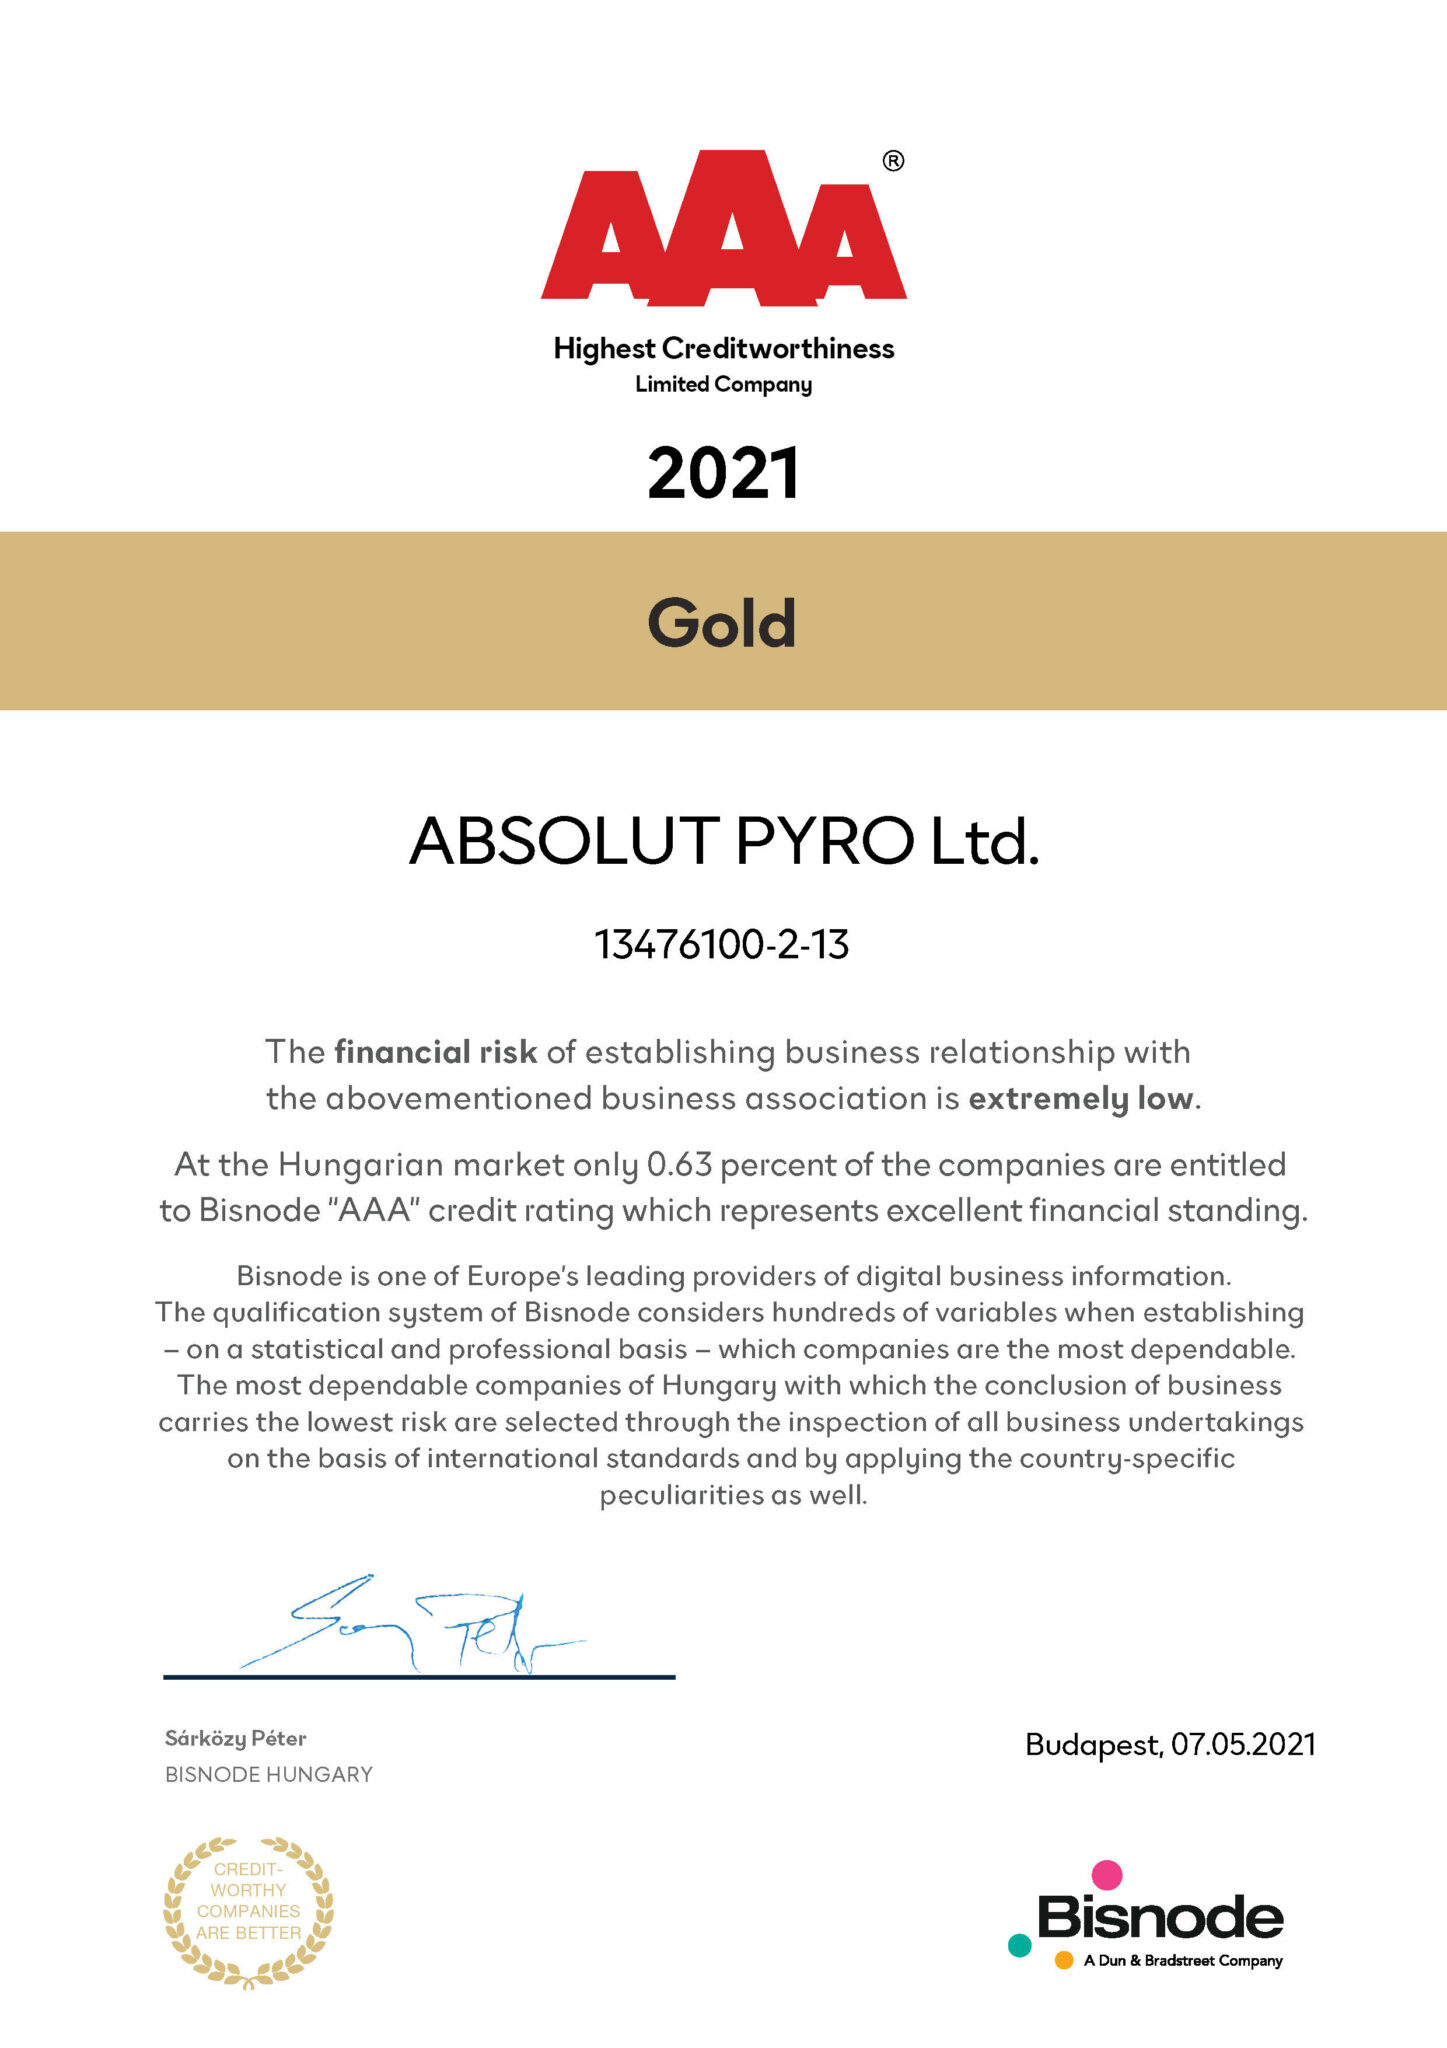 Bisnode gold certificate - Absolut Pyro Ltd. AAA creditworthy company 2021